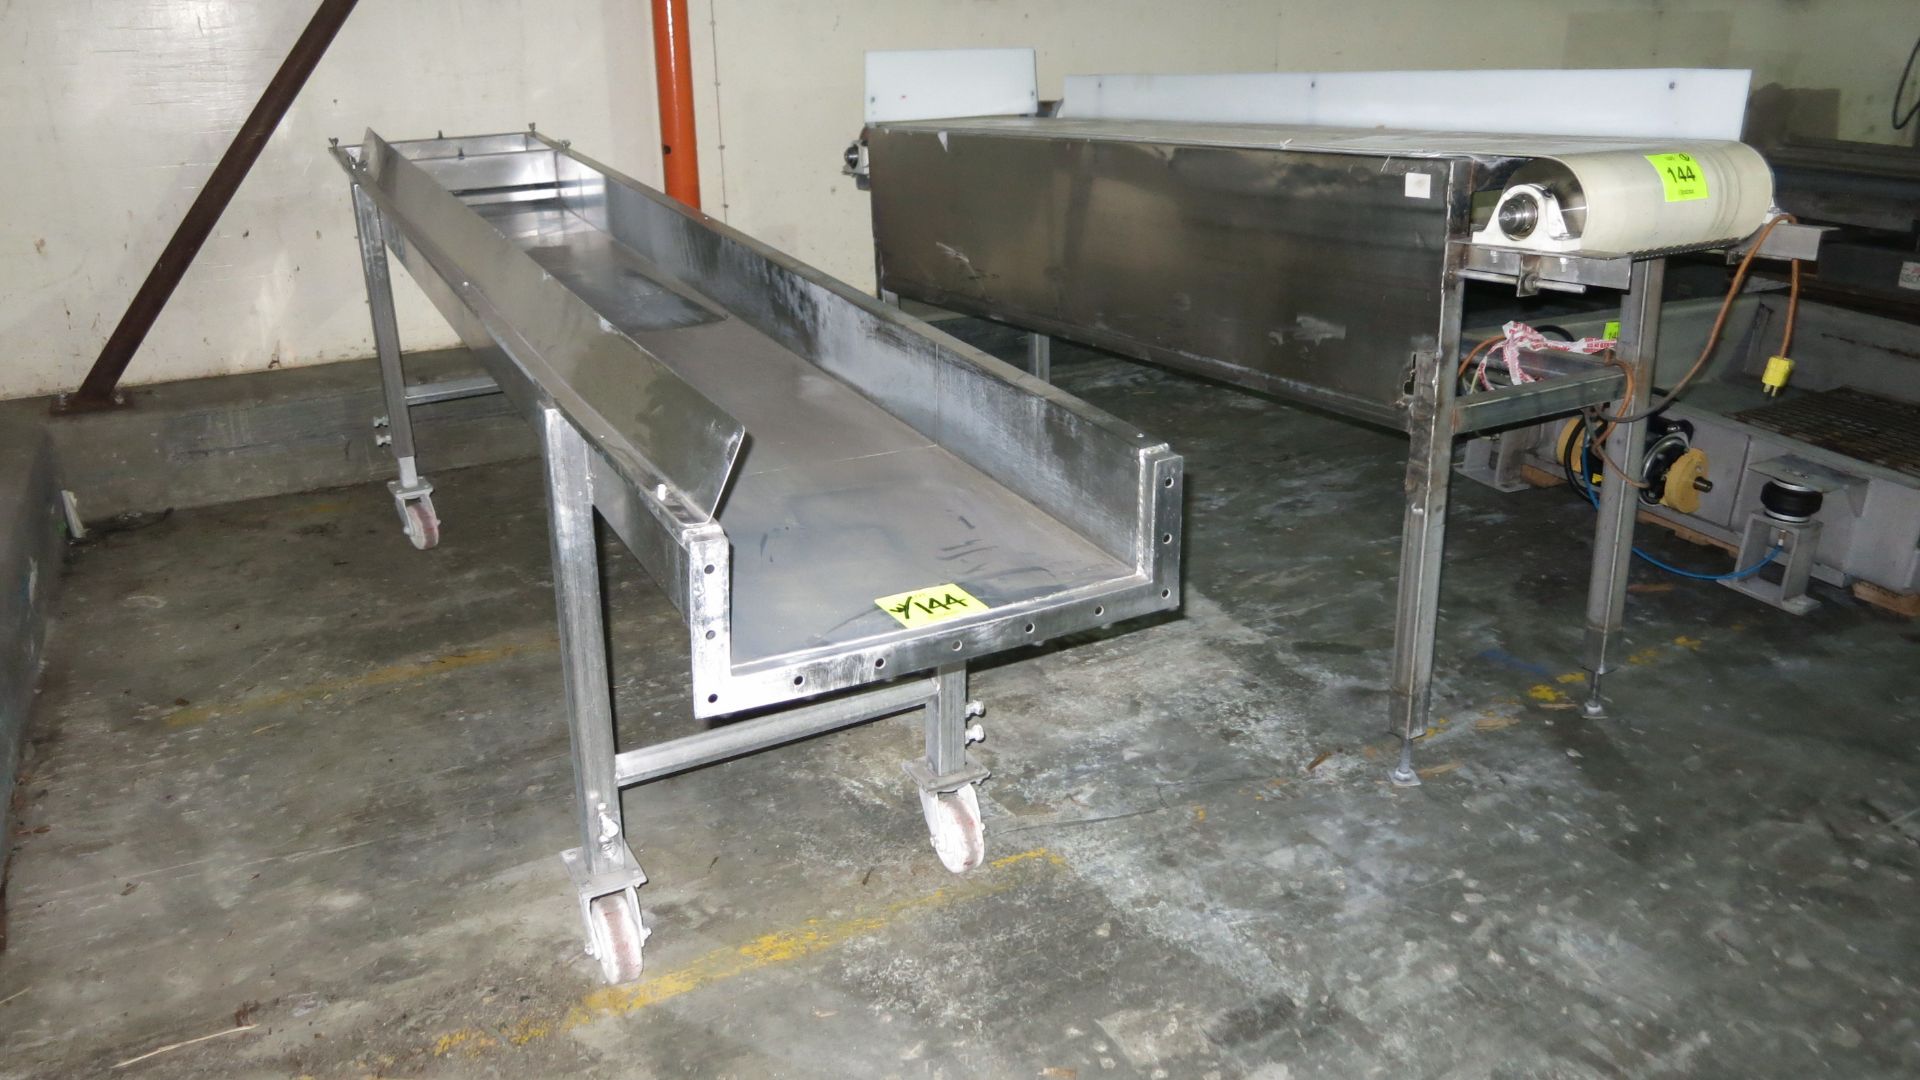 Conveyors - Image 2 of 2